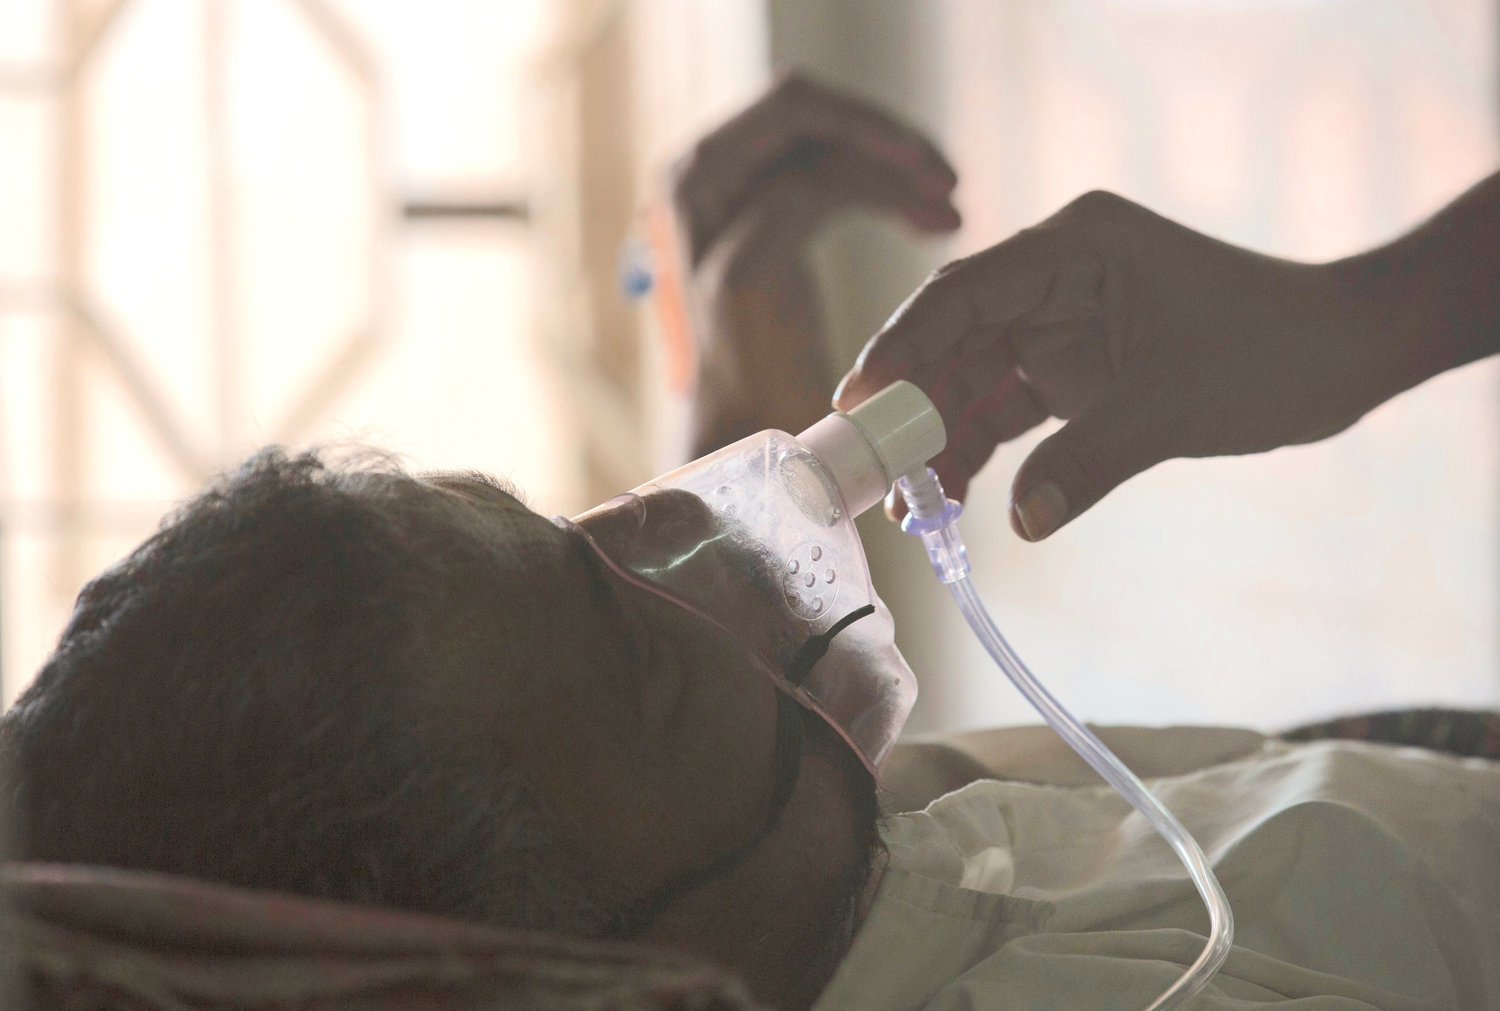 A relative adjusts the oxygen mask of a tuberculosis patient at a TB hospital on World Tuberculosis Day in Hyderabad, India, March 24, 2018. The number of people infected with tuberculosis, including the kind resistant to drugs, rose globally for the first time in years, according to a report issued Thursday, Oct. 27, by the World Health Organization.